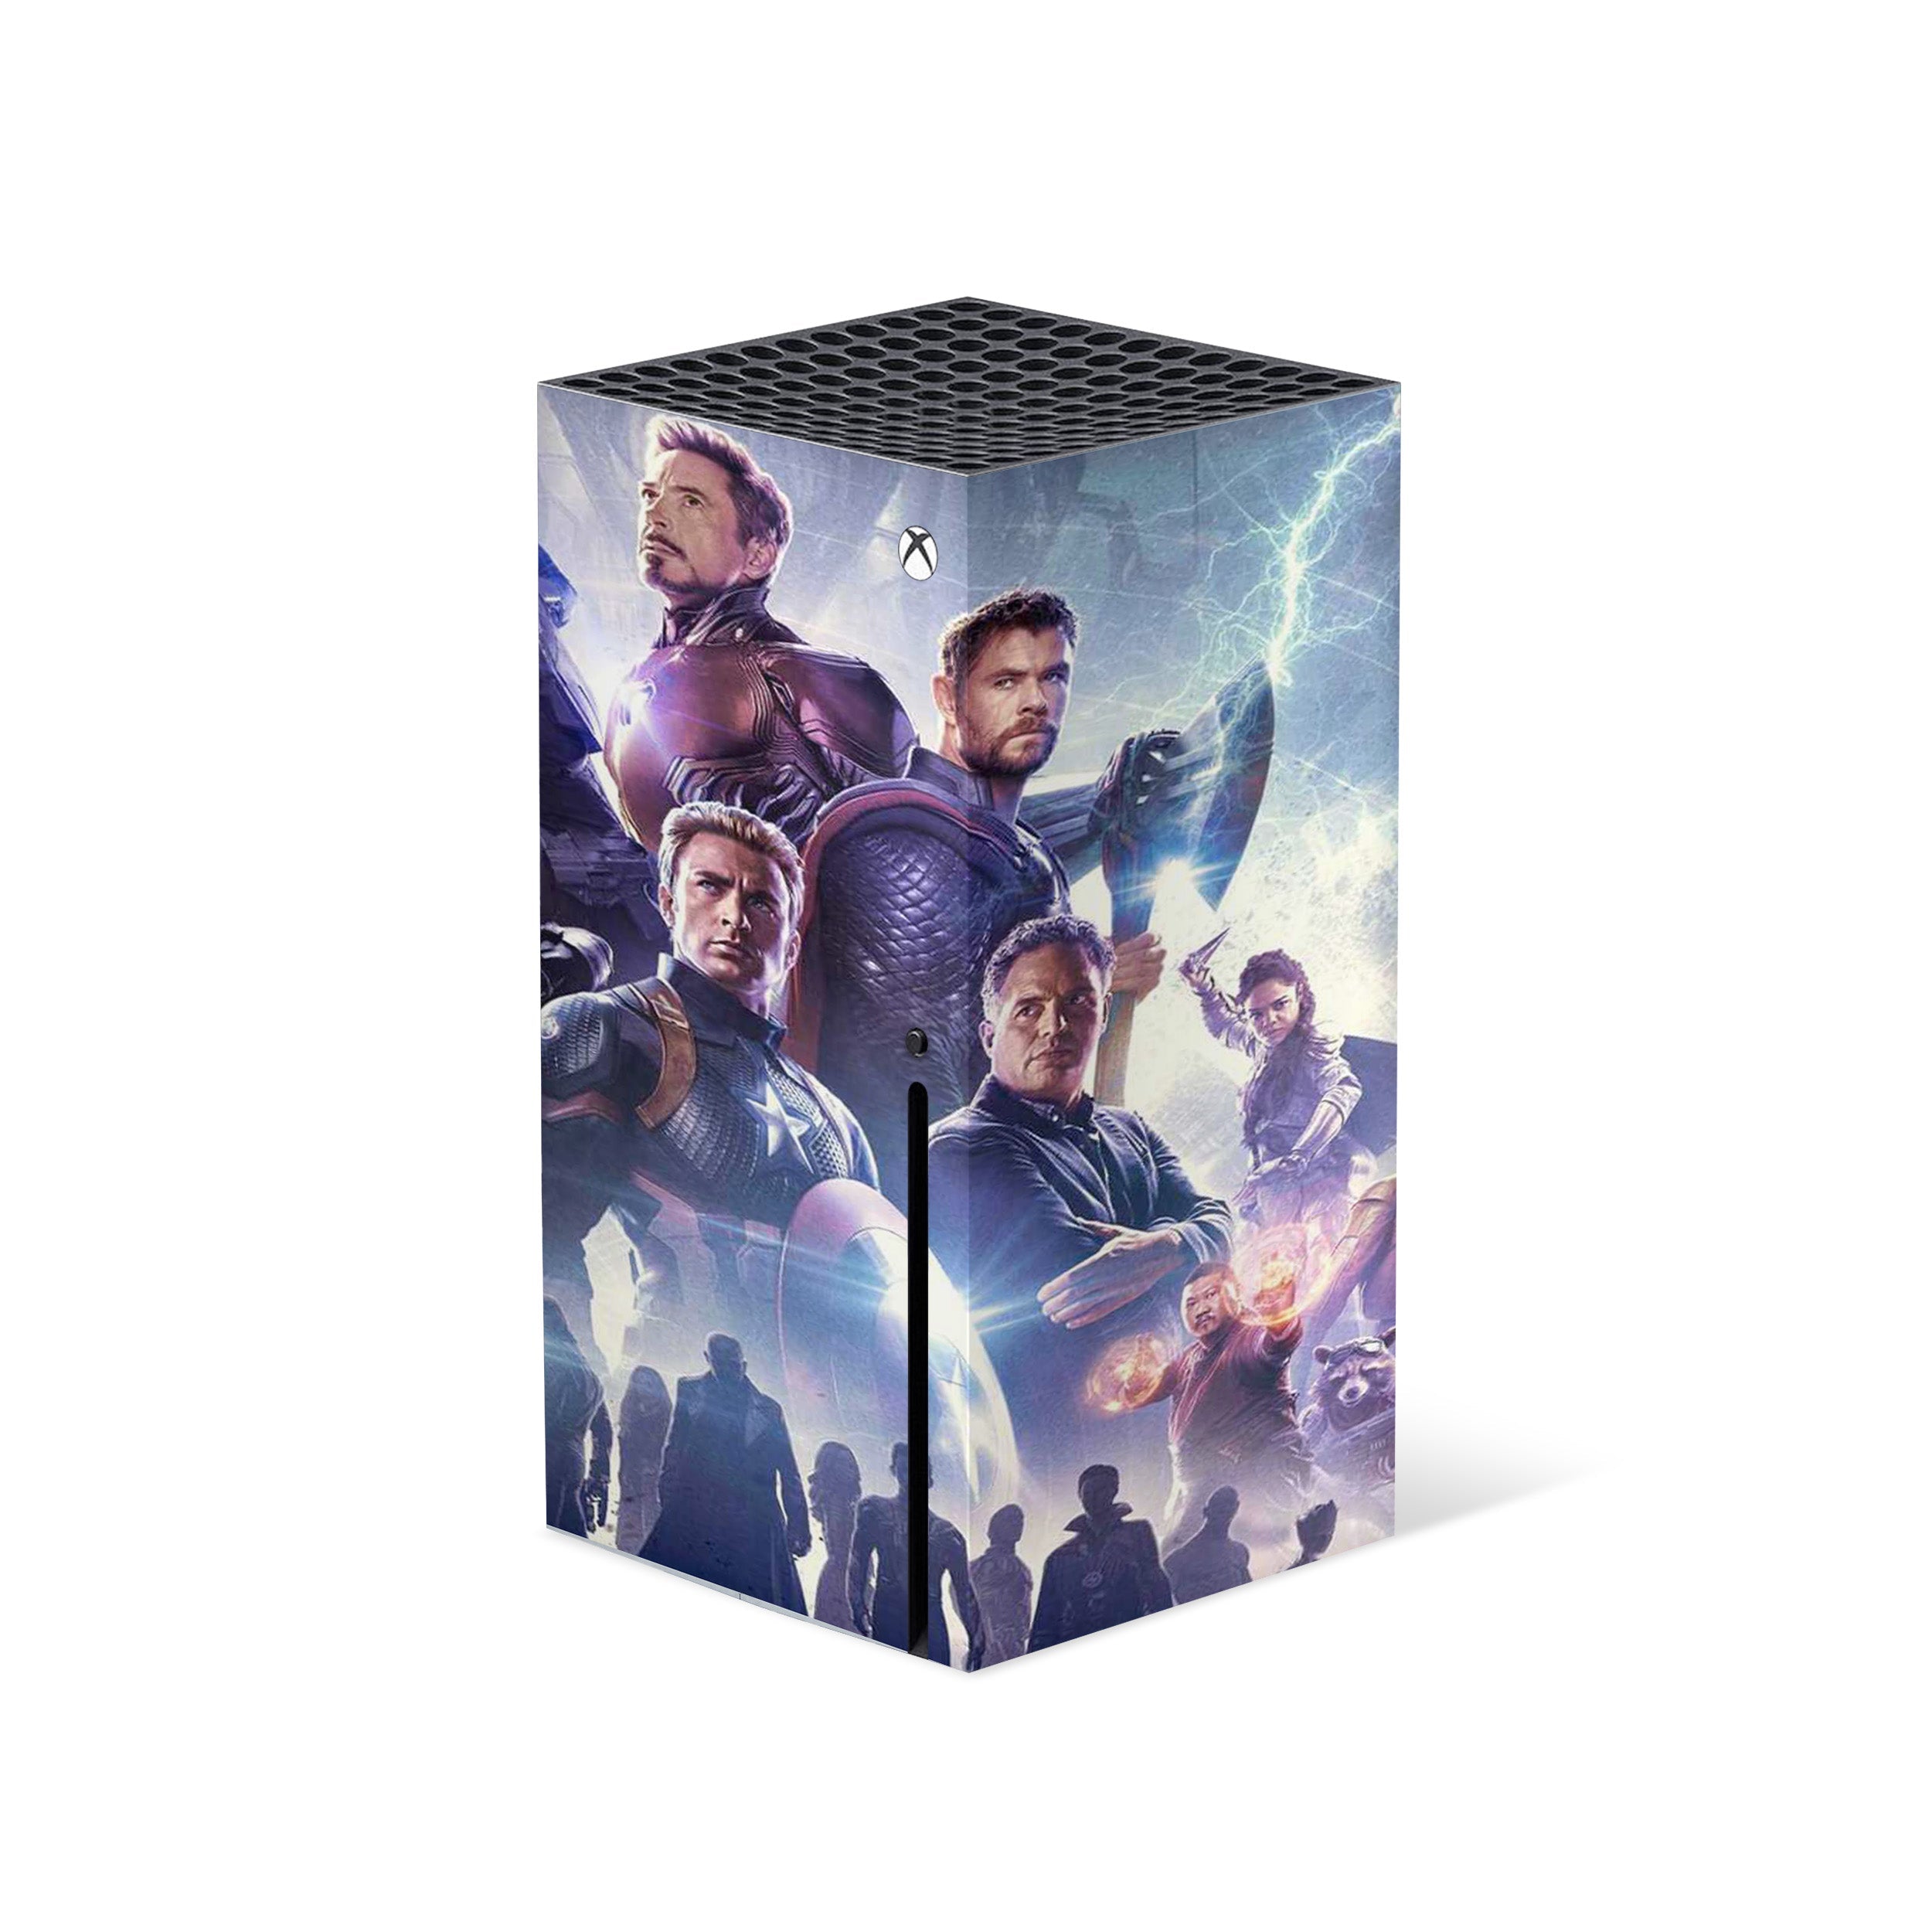 A video game skin featuring a Marvel Cinematic Universe design for the Xbox Series X.